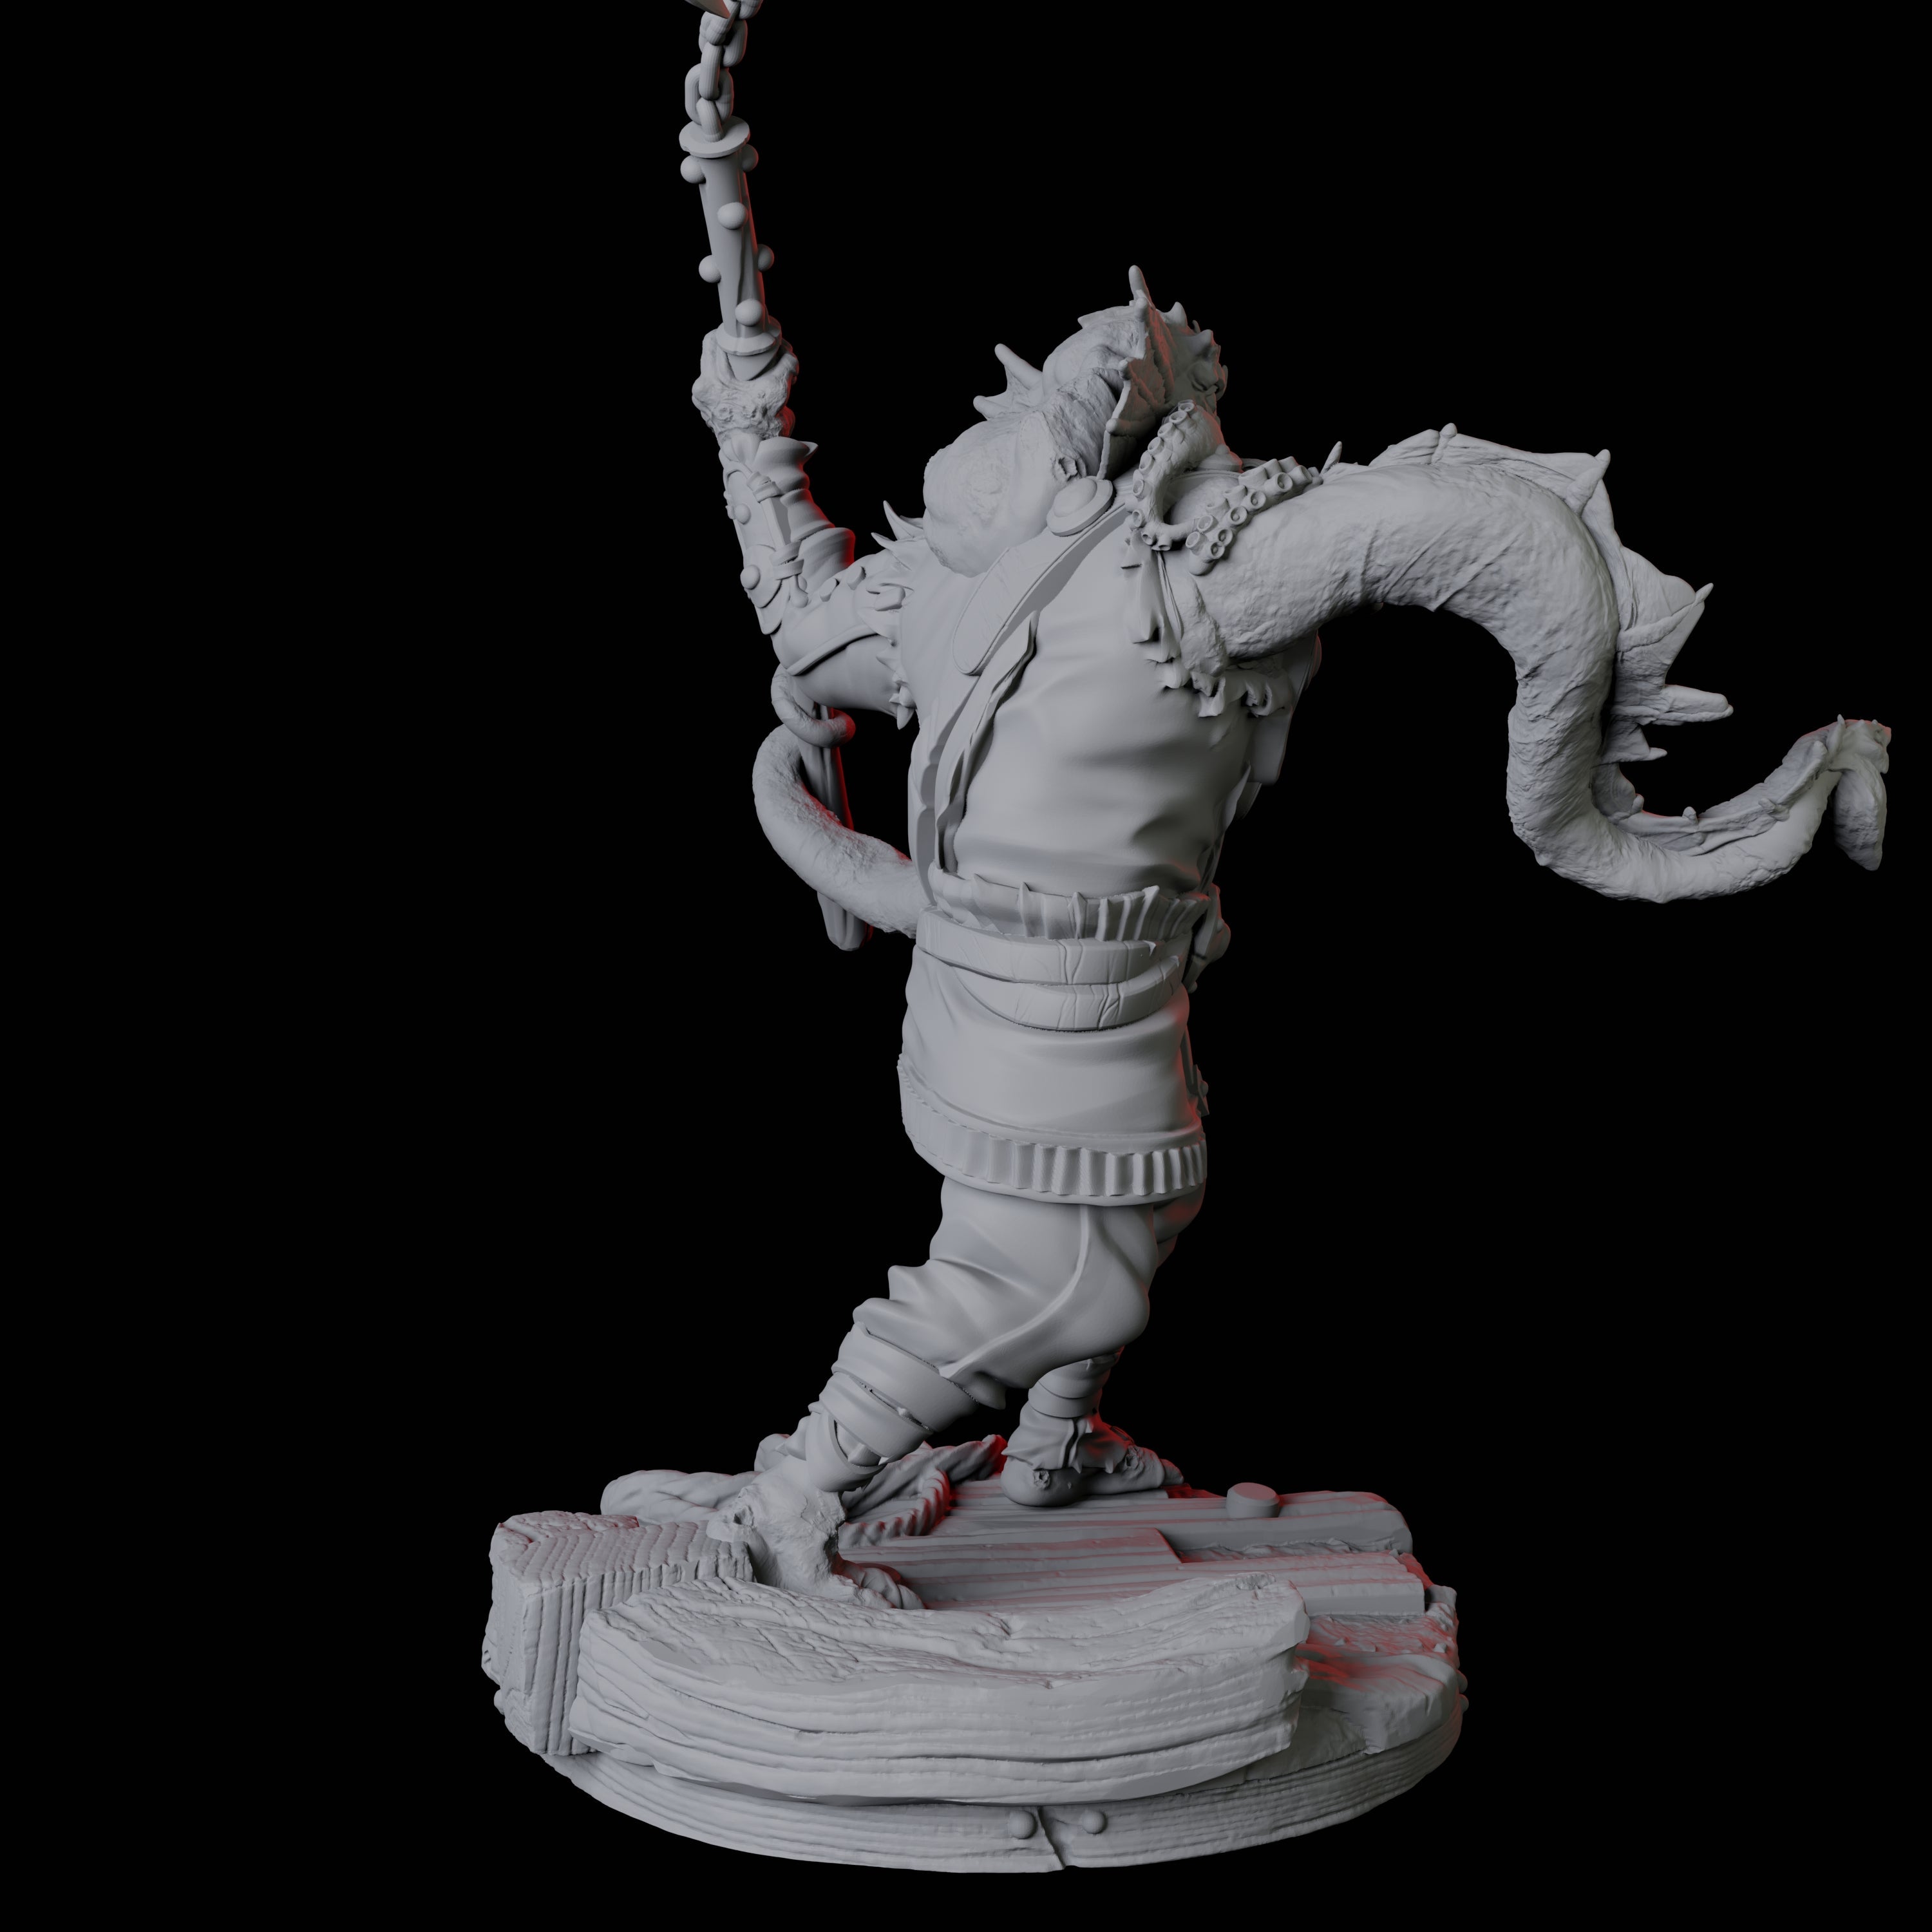 Four Sky Kraken Acolytes Miniature for Dungeons and Dragons, Pathfinder or other TTRPGs